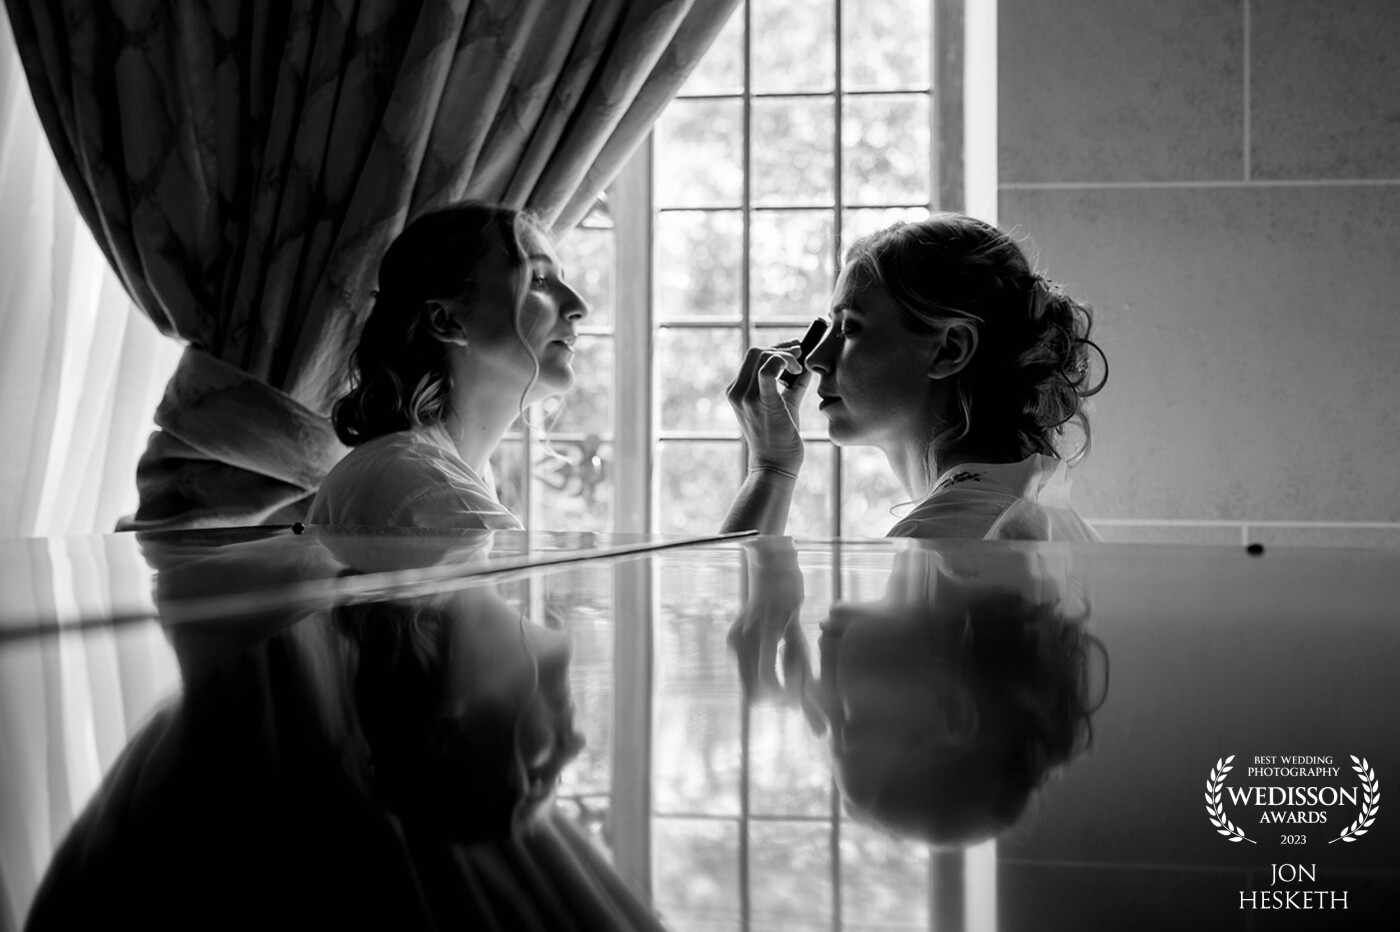 Every room for bridal prep should have a polished grand piano ! The light was amazing, the reflection of Carys and Sian gave allowed me to capture a special moment between two sisters.